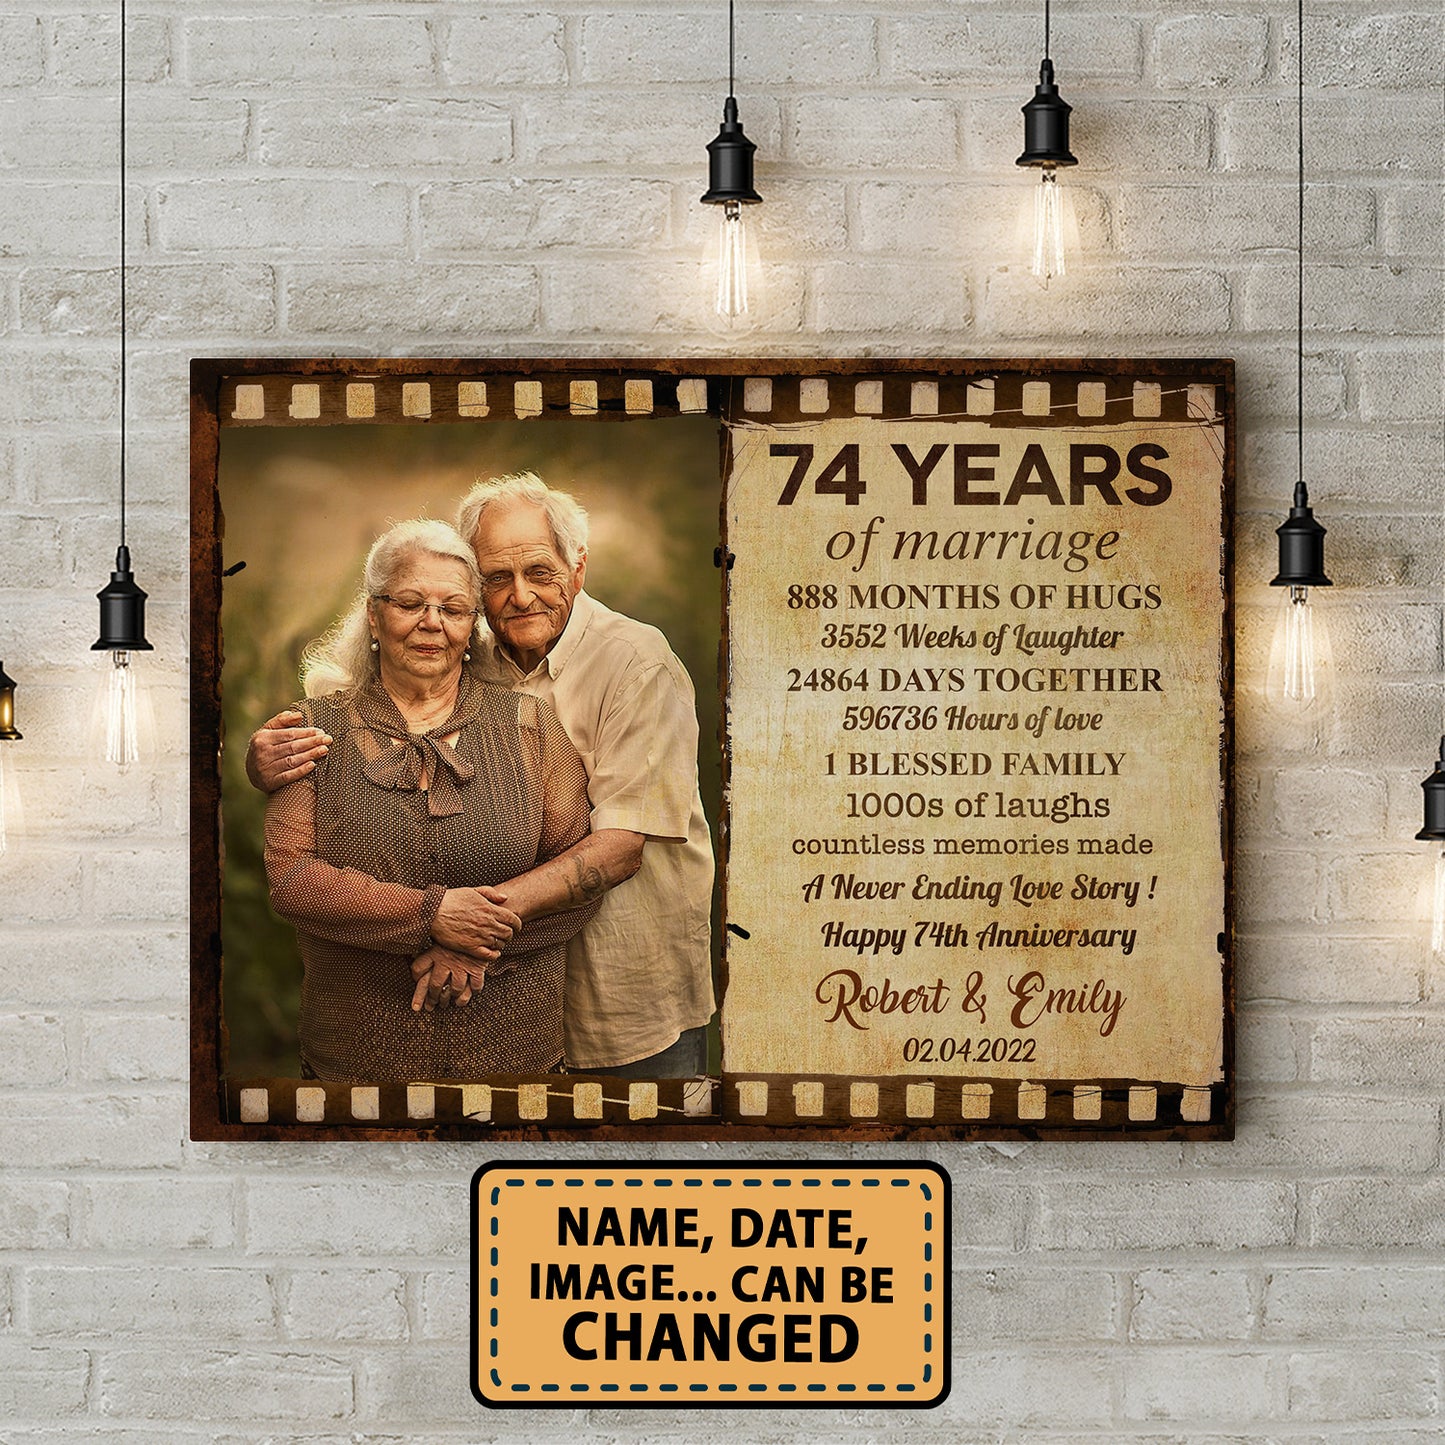 Happy 74th Anniversary 74 Years Of Marriage Film Anniversary Canvas